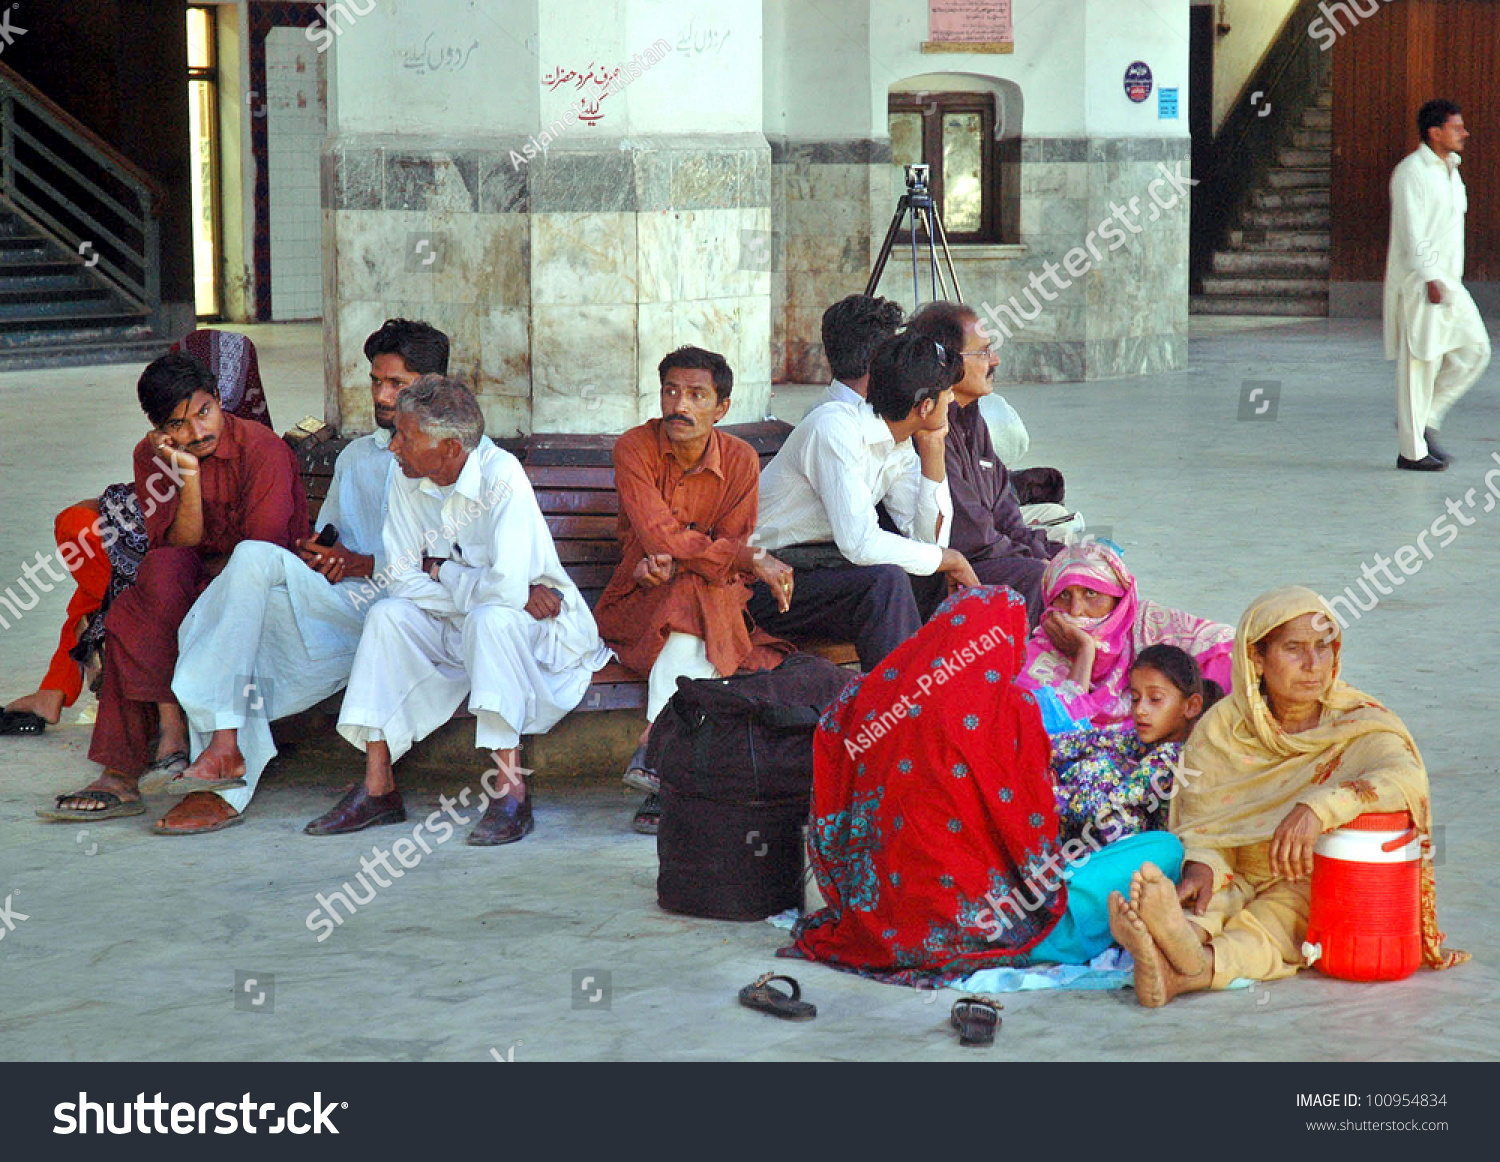 stock-photo-lahore-pakistan-apr-passengers-wait-for-their-trains-at-a-platform-at-lahore-railway-station-100954834.jpg